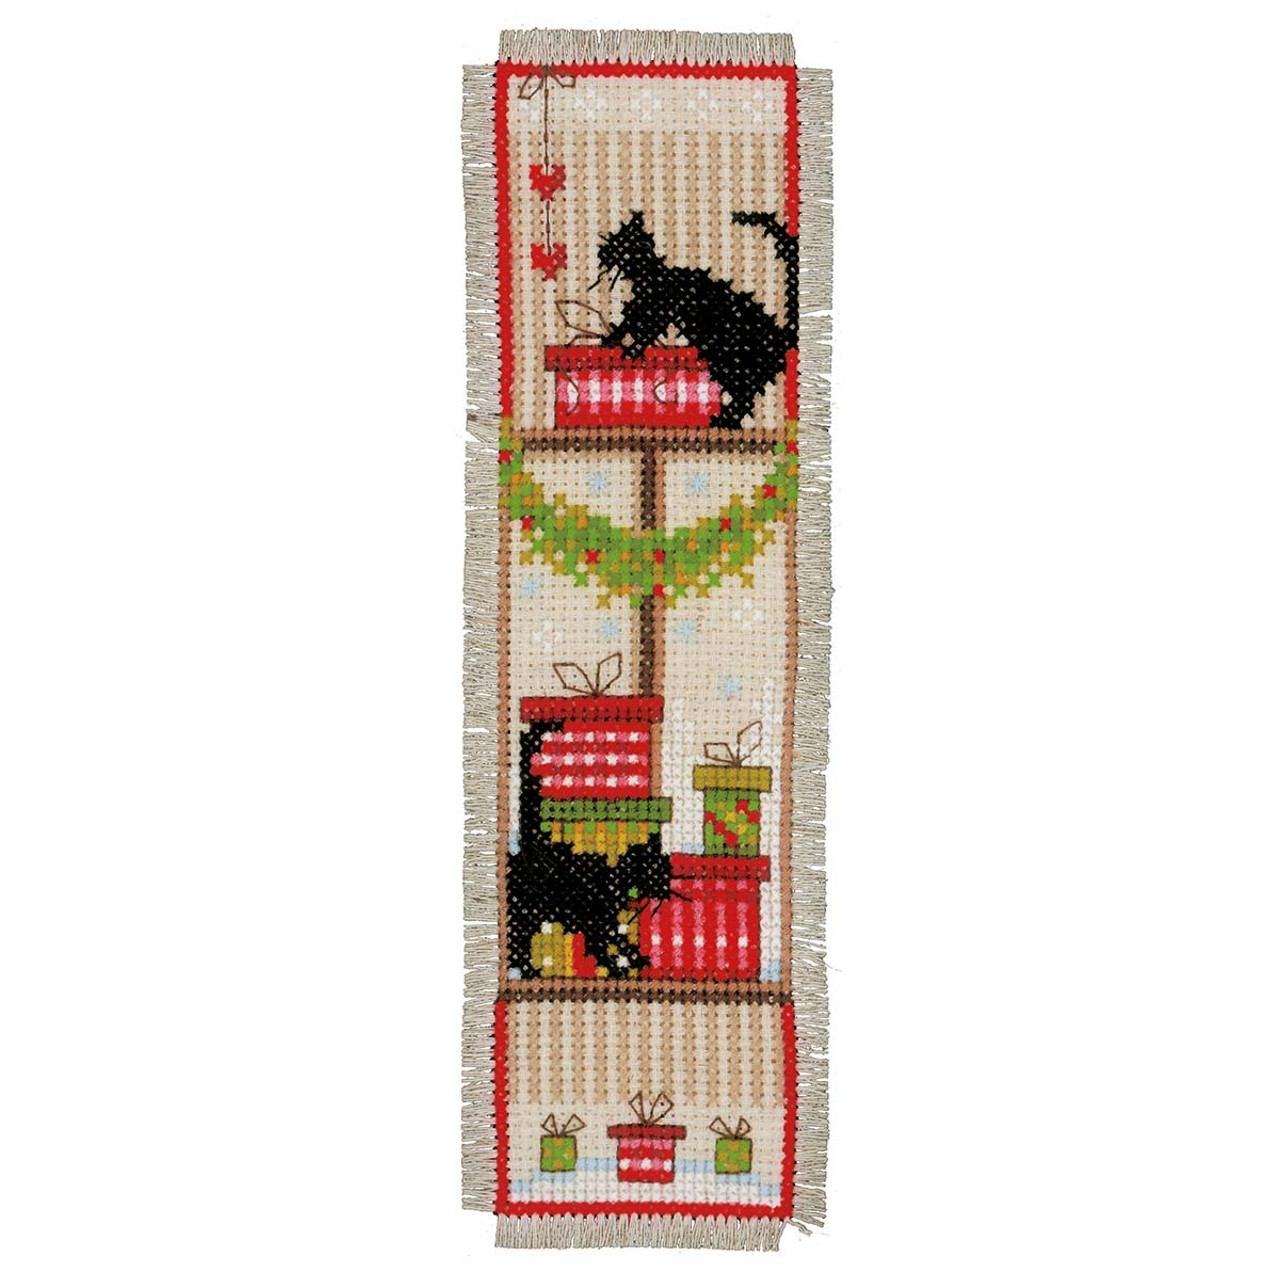 Vervaco Counted Cross Stitch Bookmark Kit. Butterfly 1.